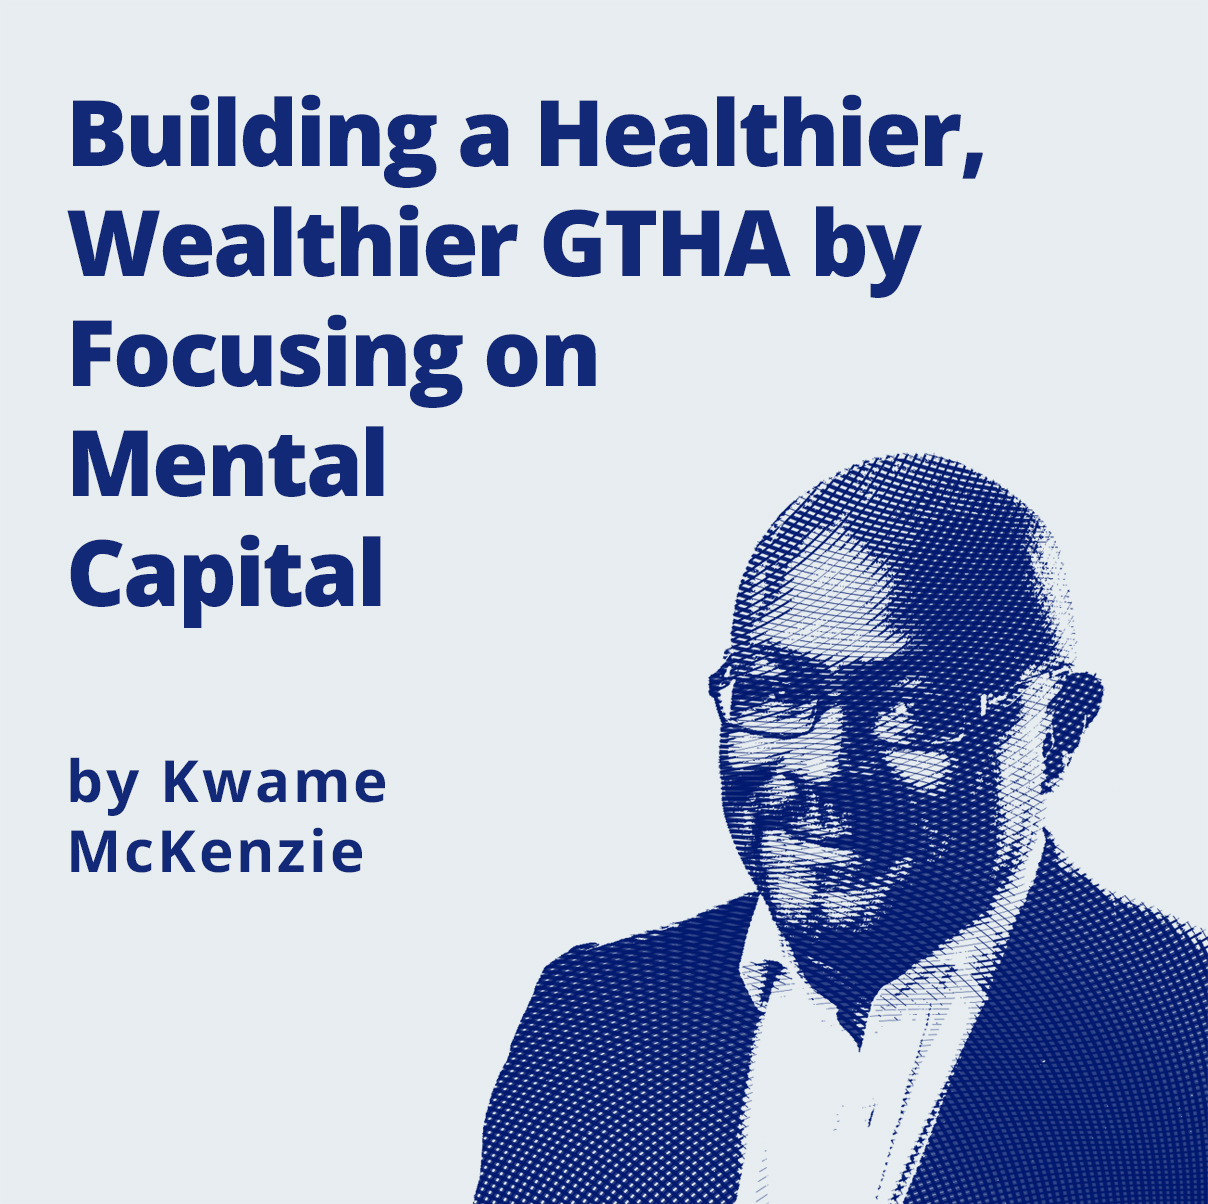 Image -  Building a Healthier, Wealthier GTHA by Focusing on Mental Capital by Kwame McKenzie